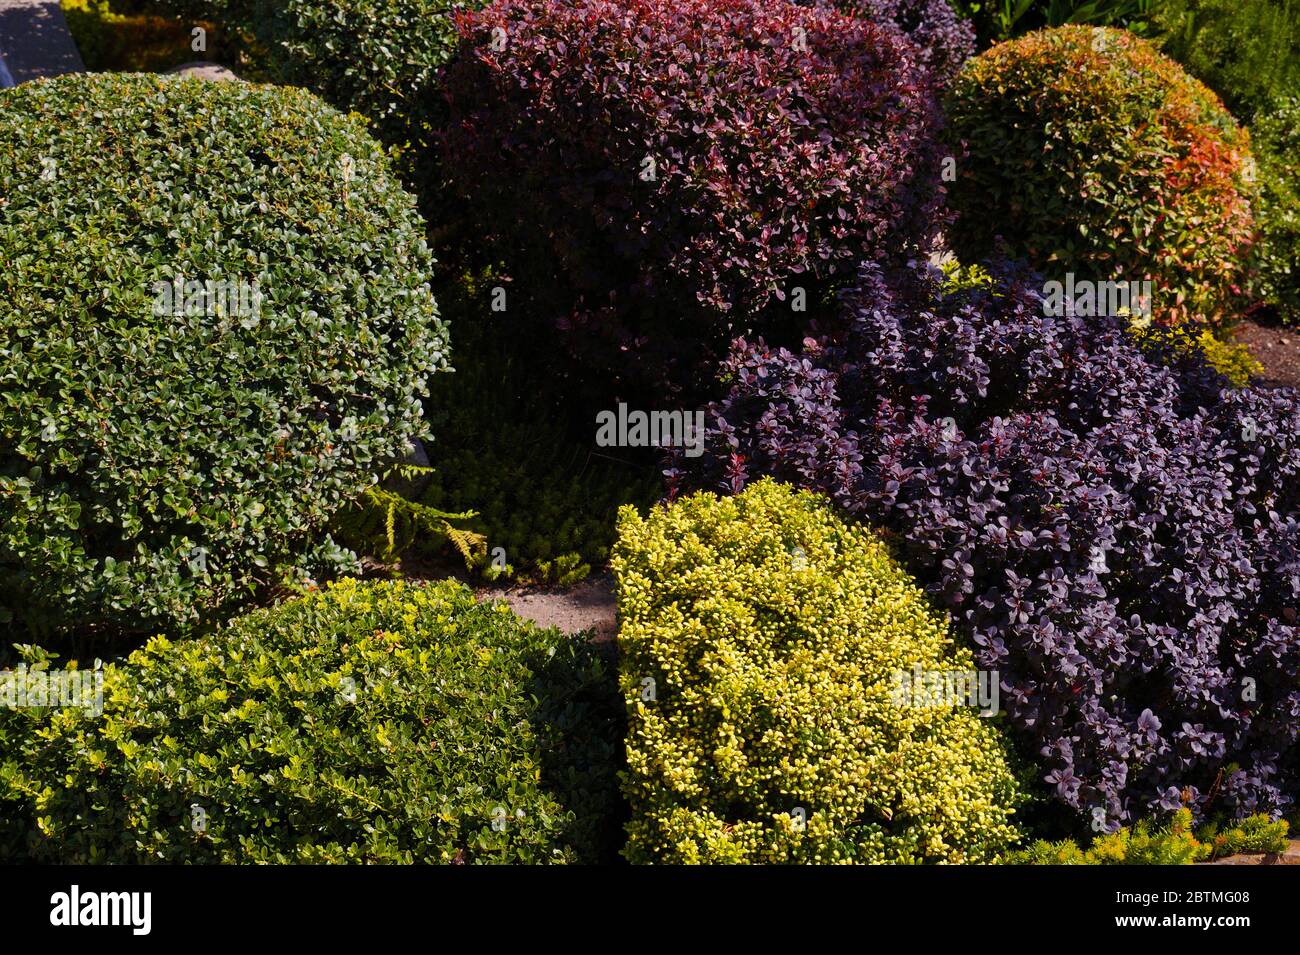 Many varieties of plants suitable for forming, including barberries. Rockery. Stock Photo